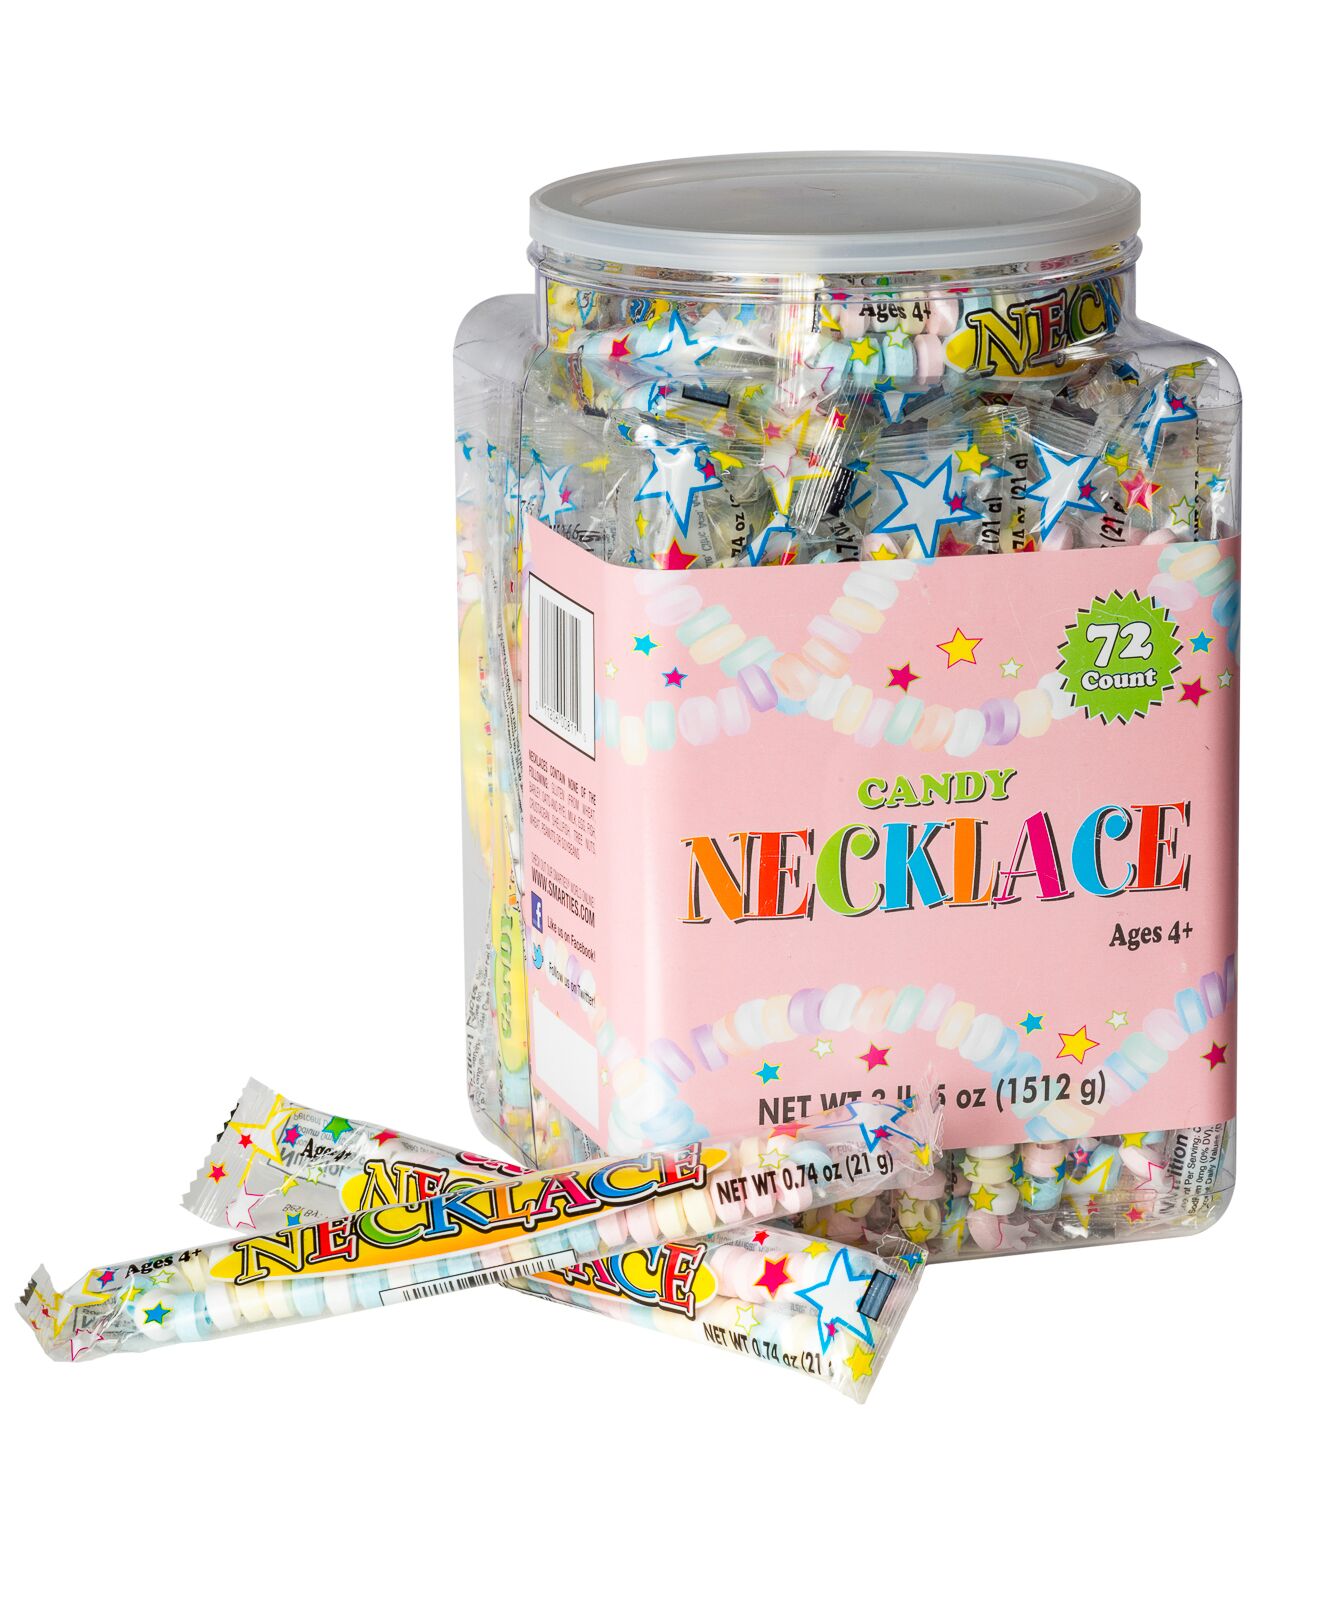 Smarties Candy Necklace, 2 Lb, 72 Ct